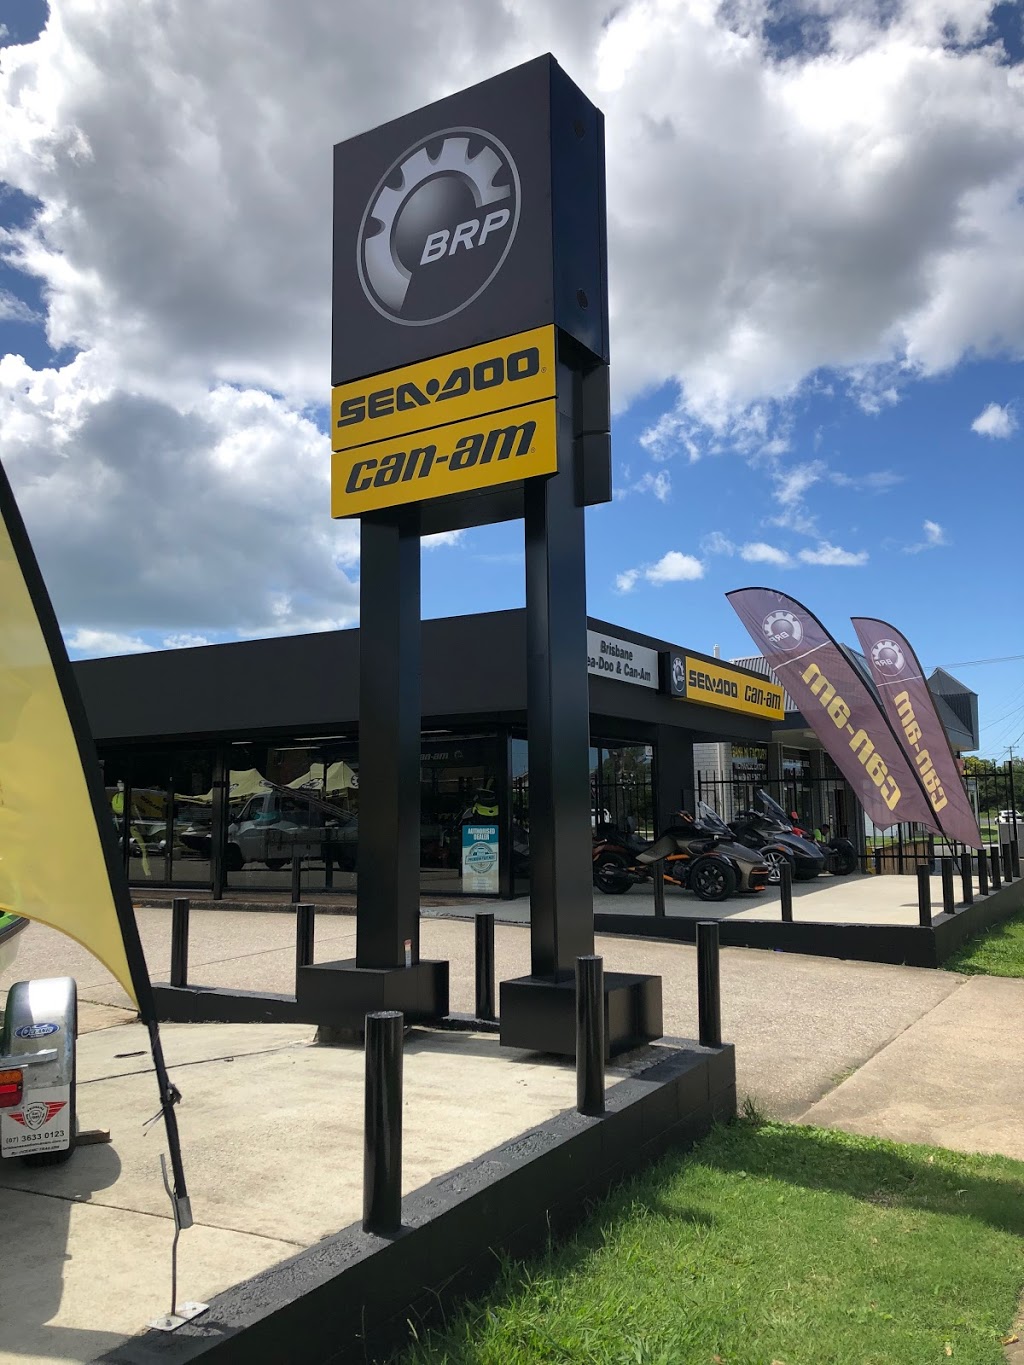 Brisbane Sea-Doo and Can-Am | store | 239 Zillmere Rd, Zillmere QLD 4034, Australia | 0736330123 OR +61 7 3633 0123